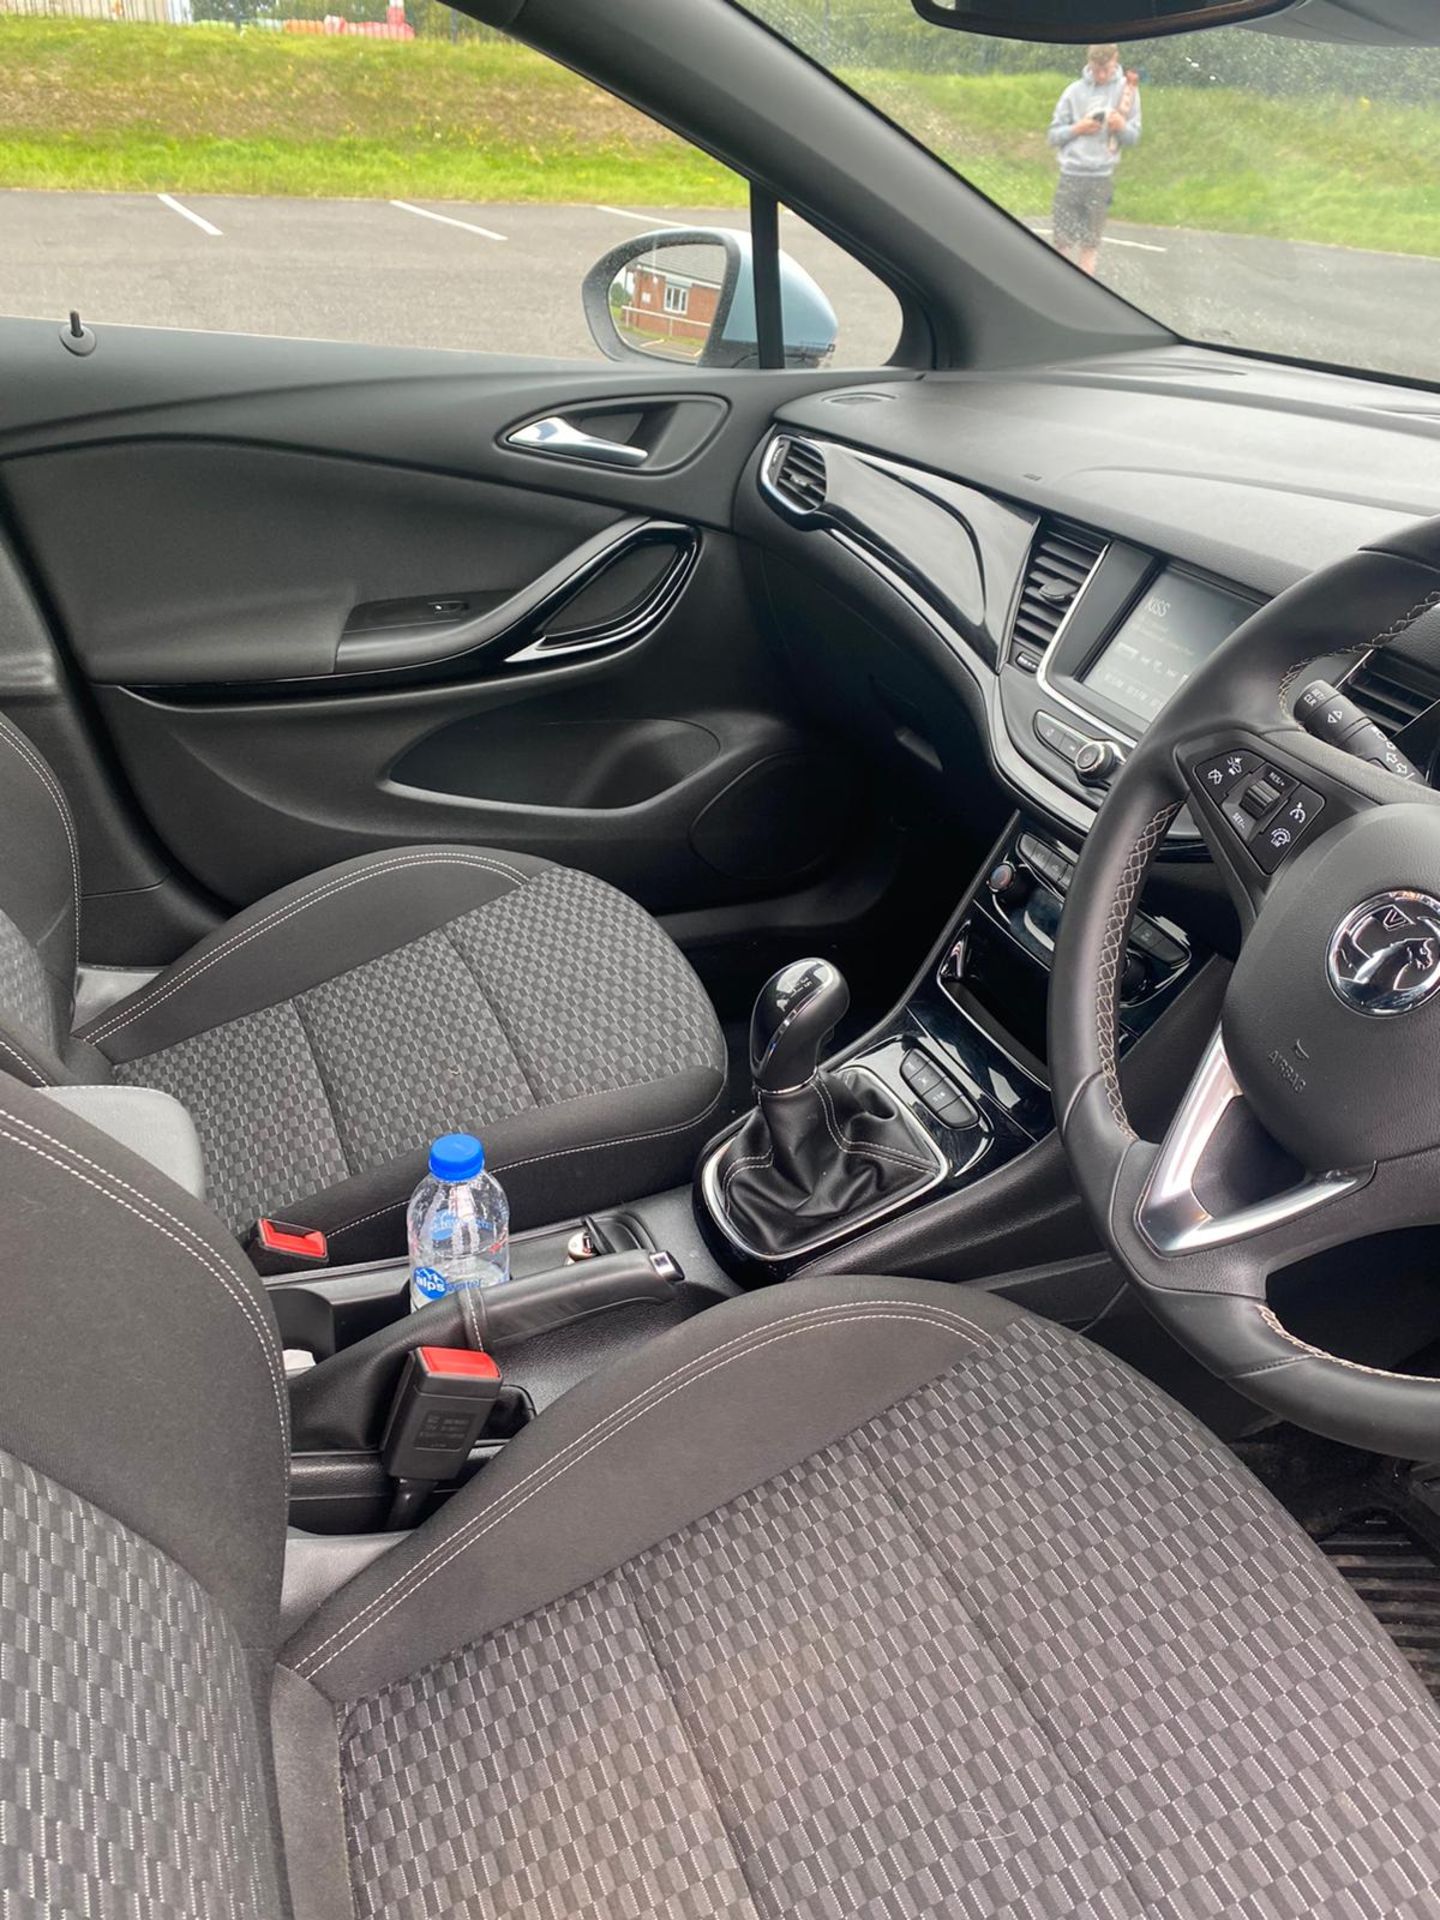 2018/18 REG VAUXHALL ASTRA SRI TURBO 1.4 PETROL SILVER 5 DOOR HATCHBACK, SHOWING 2 FORMER KEEPERS - Image 6 of 12